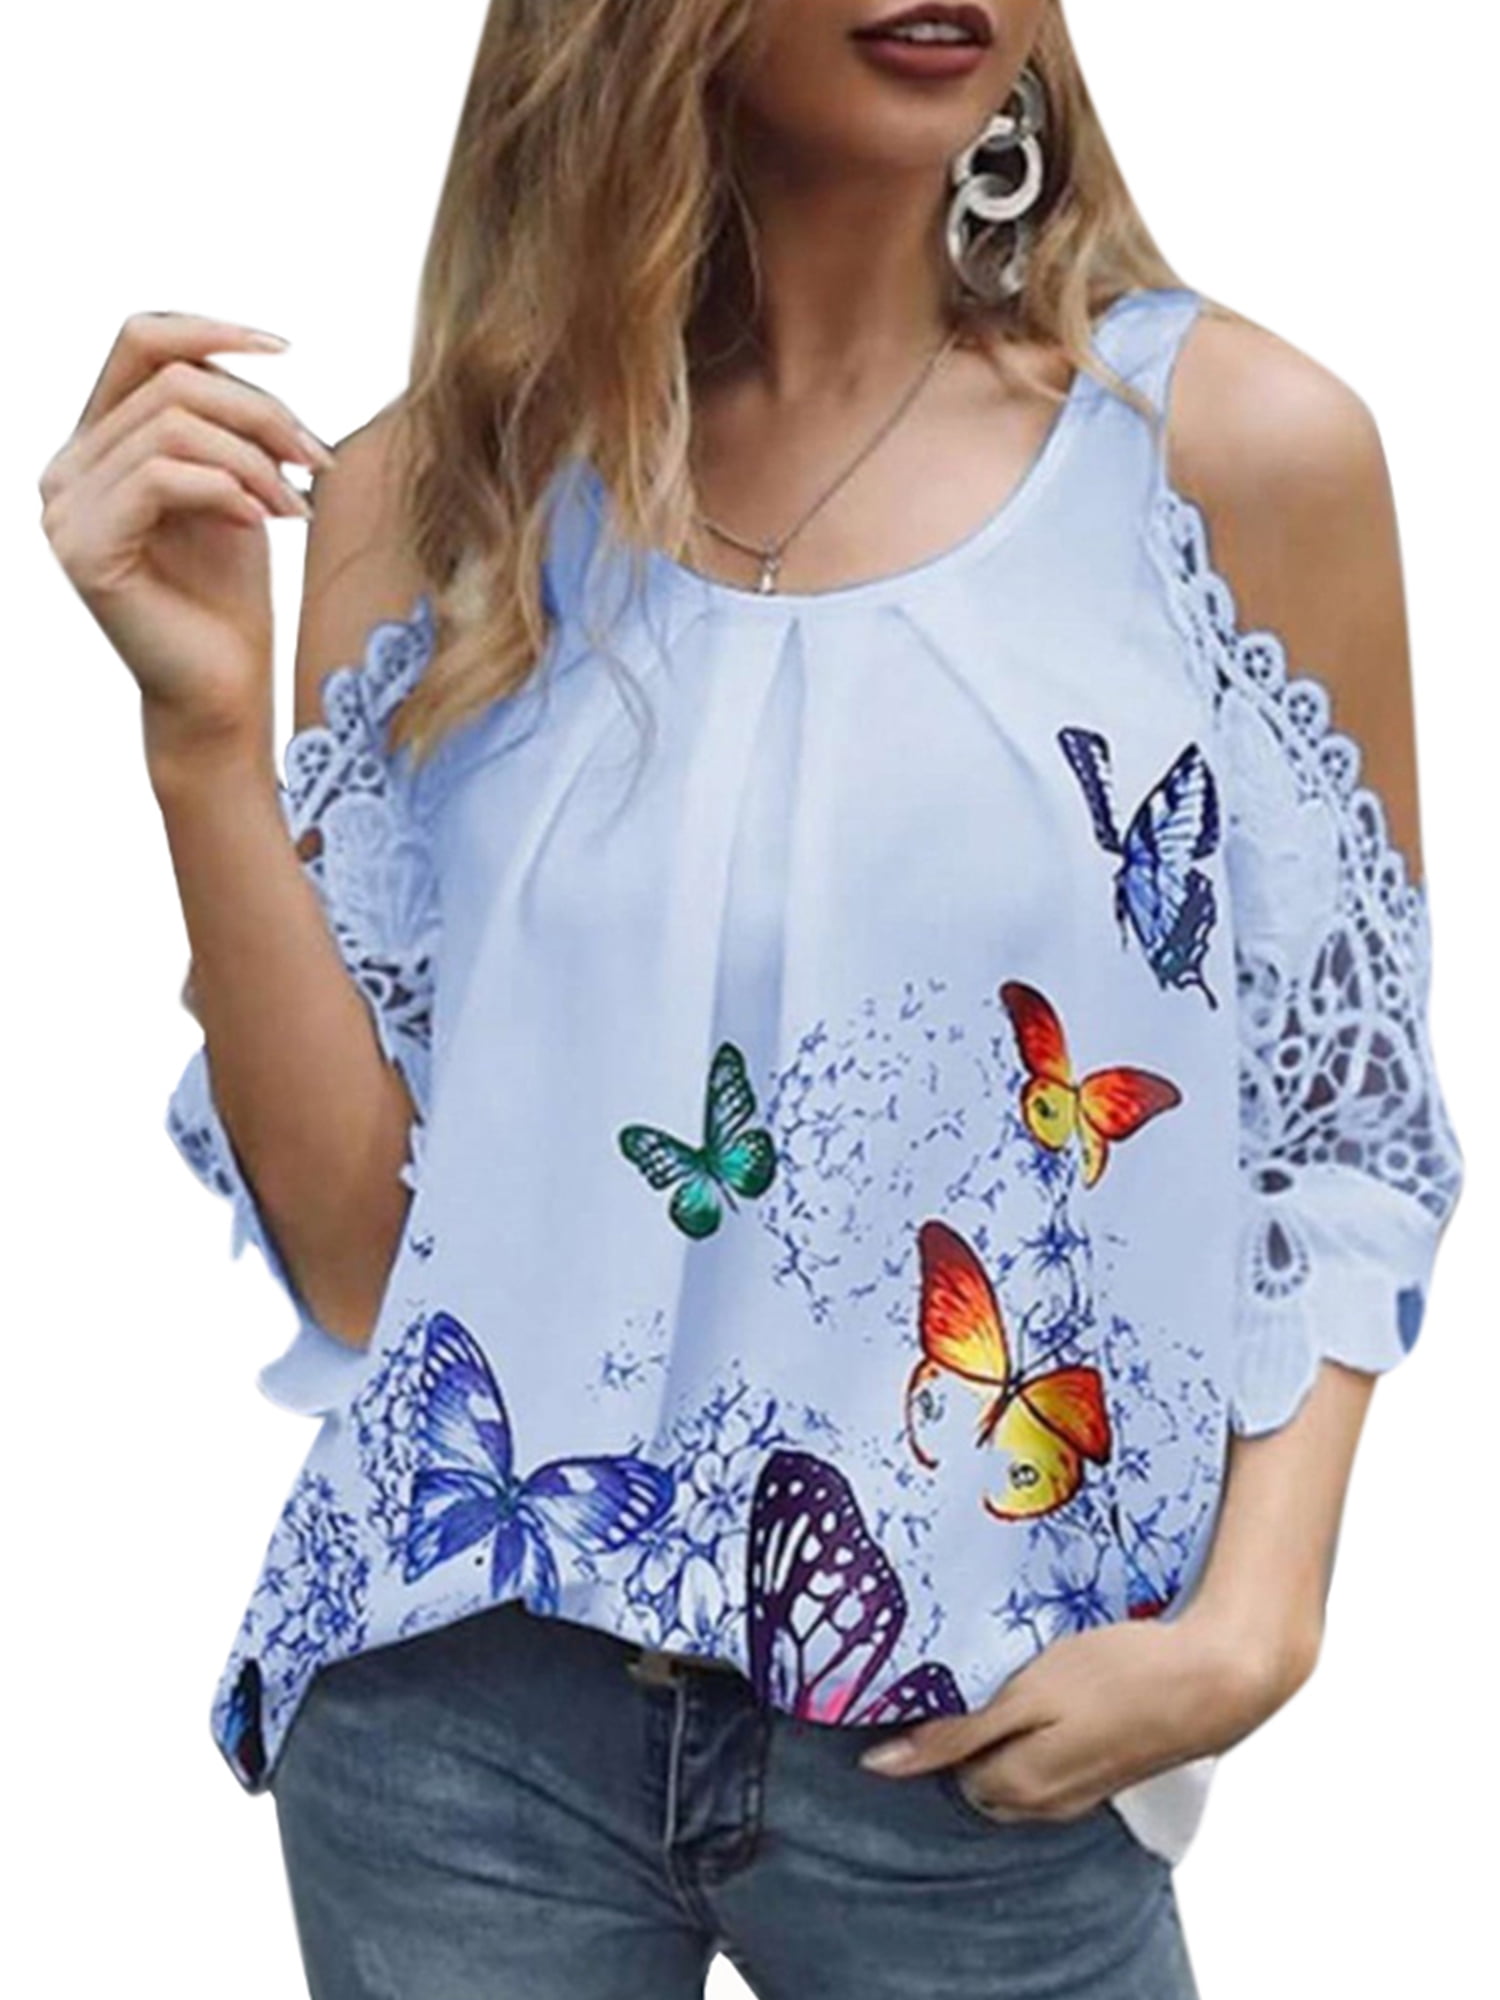 Plus Size Women's Floral Printed Short Sleeve Shirt Summer Cold Shoulder Tops Casual Blouse